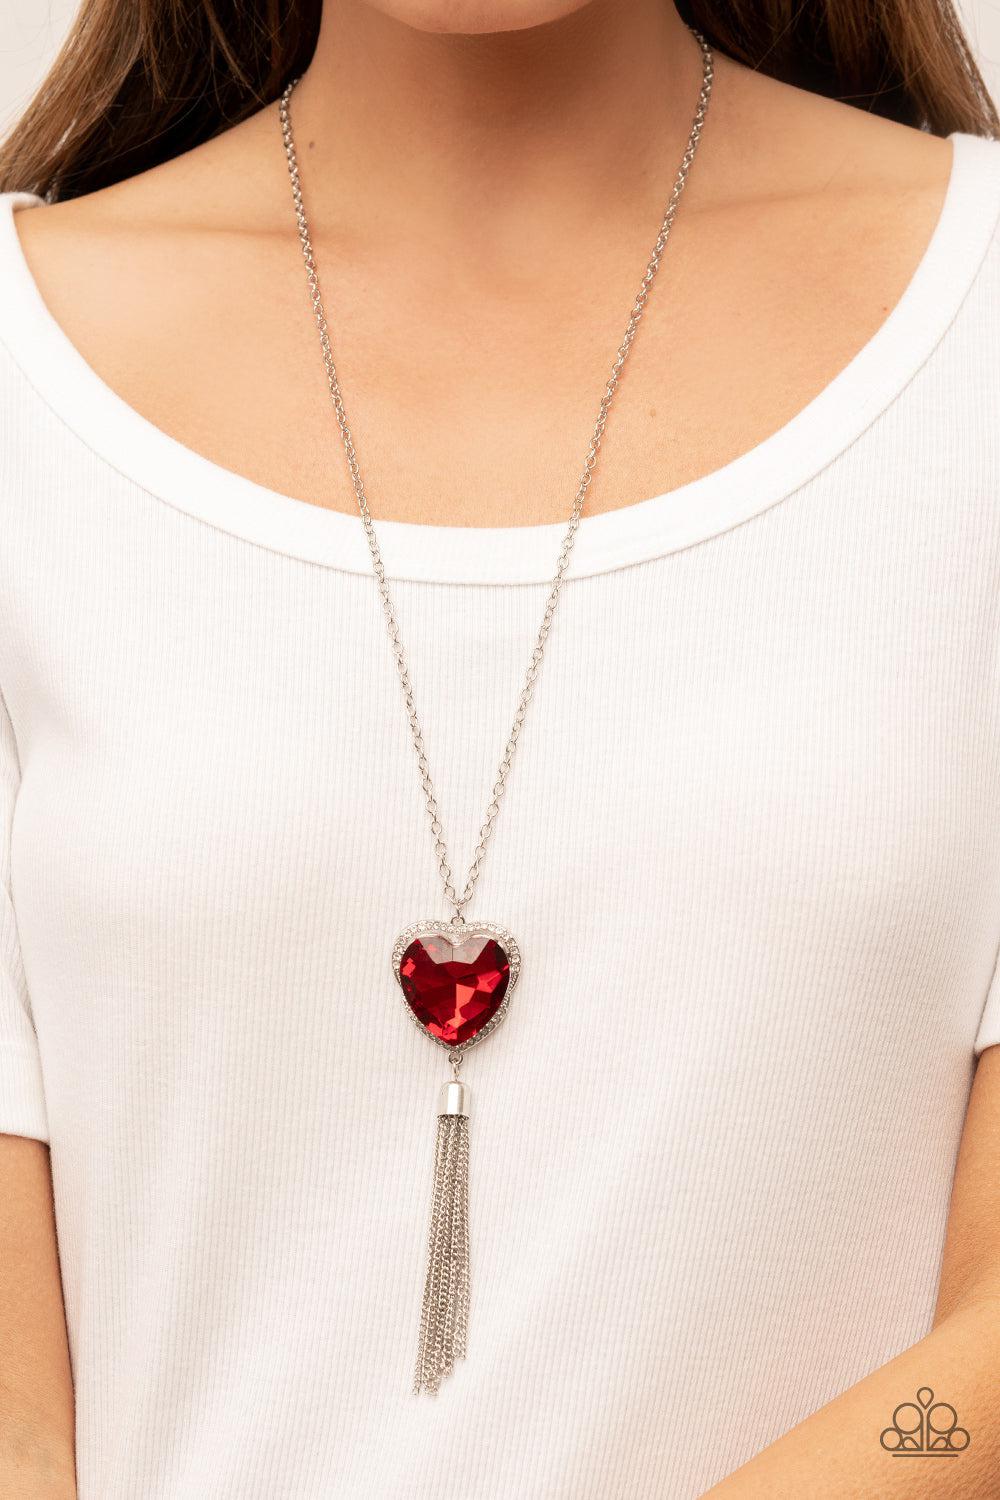 Finding My Forever Red Rhinestone Heart Necklace - Paparazzi Accessories- lightbox - CarasShop.com - $5 Jewelry by Cara Jewels